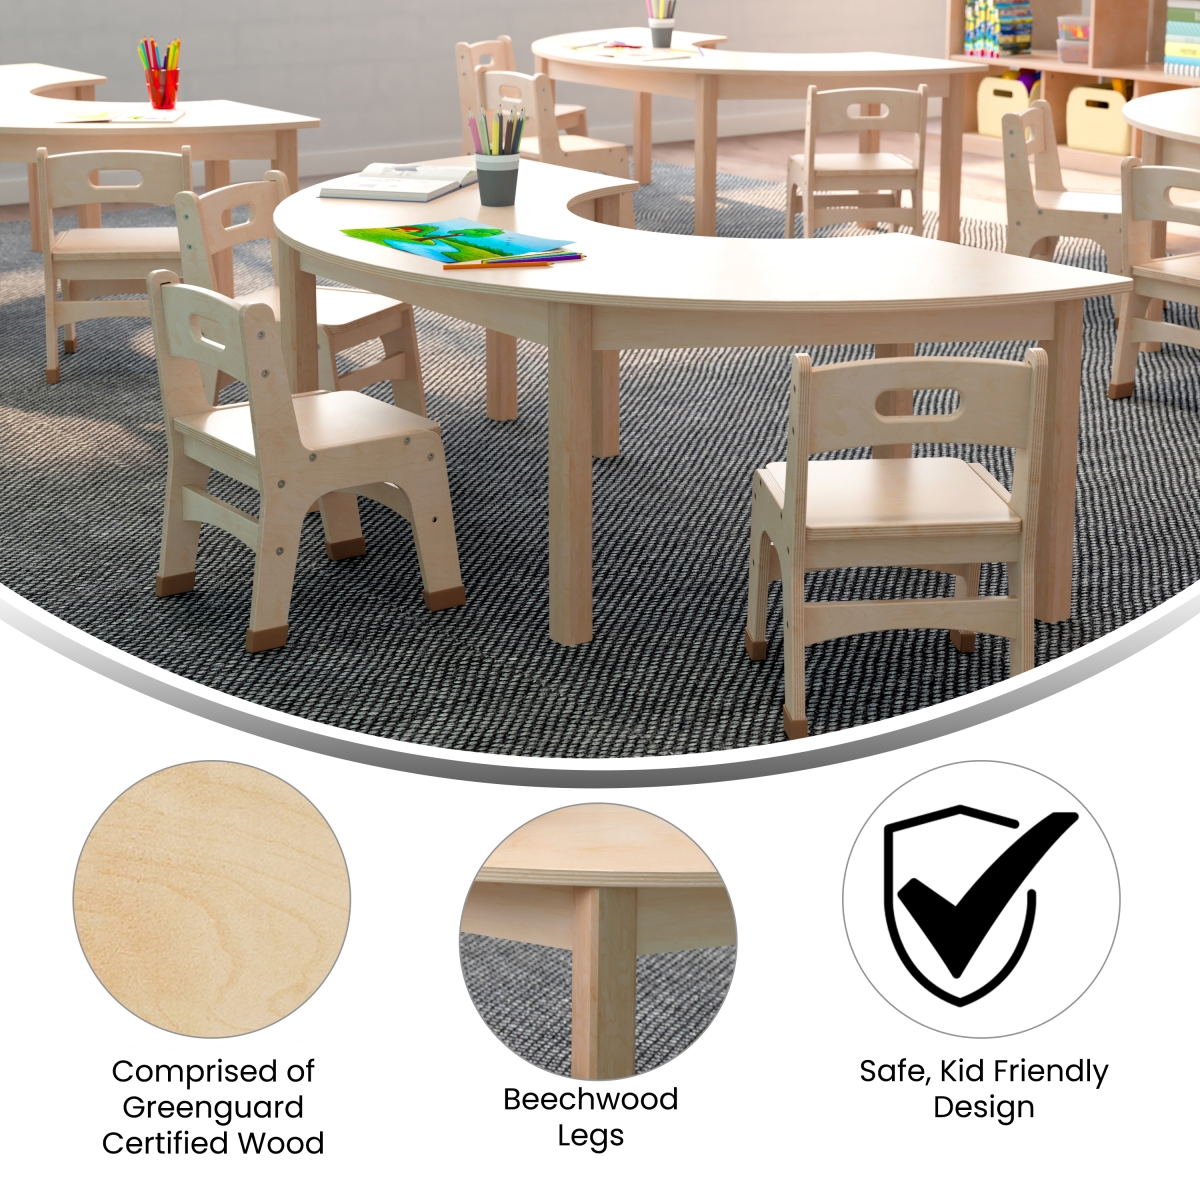 Picture of Flash Furniture MK-ME088014-GG 29.5 x 59 x 18 in. Bright Beginnings Commercial Grade Wooden Half Circle Preschool Classroom Activity Table, Beech